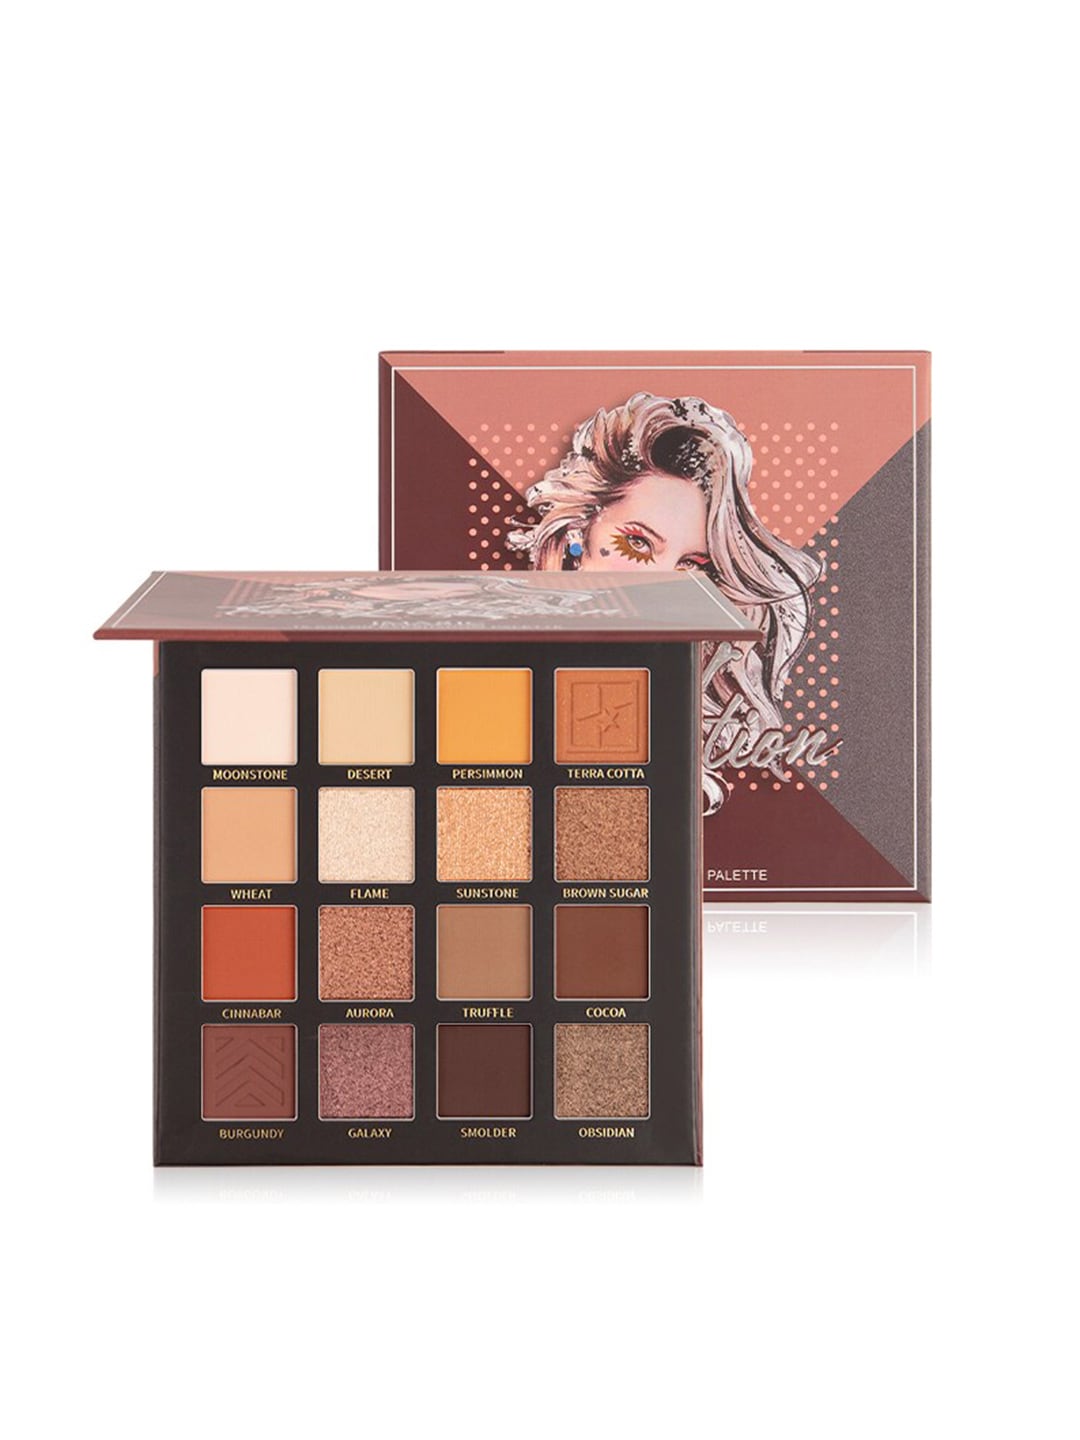 IMAGIC Professional Cosmetics Star Temptation 16 Colors Eyeshadow Palette EY341 Price in India